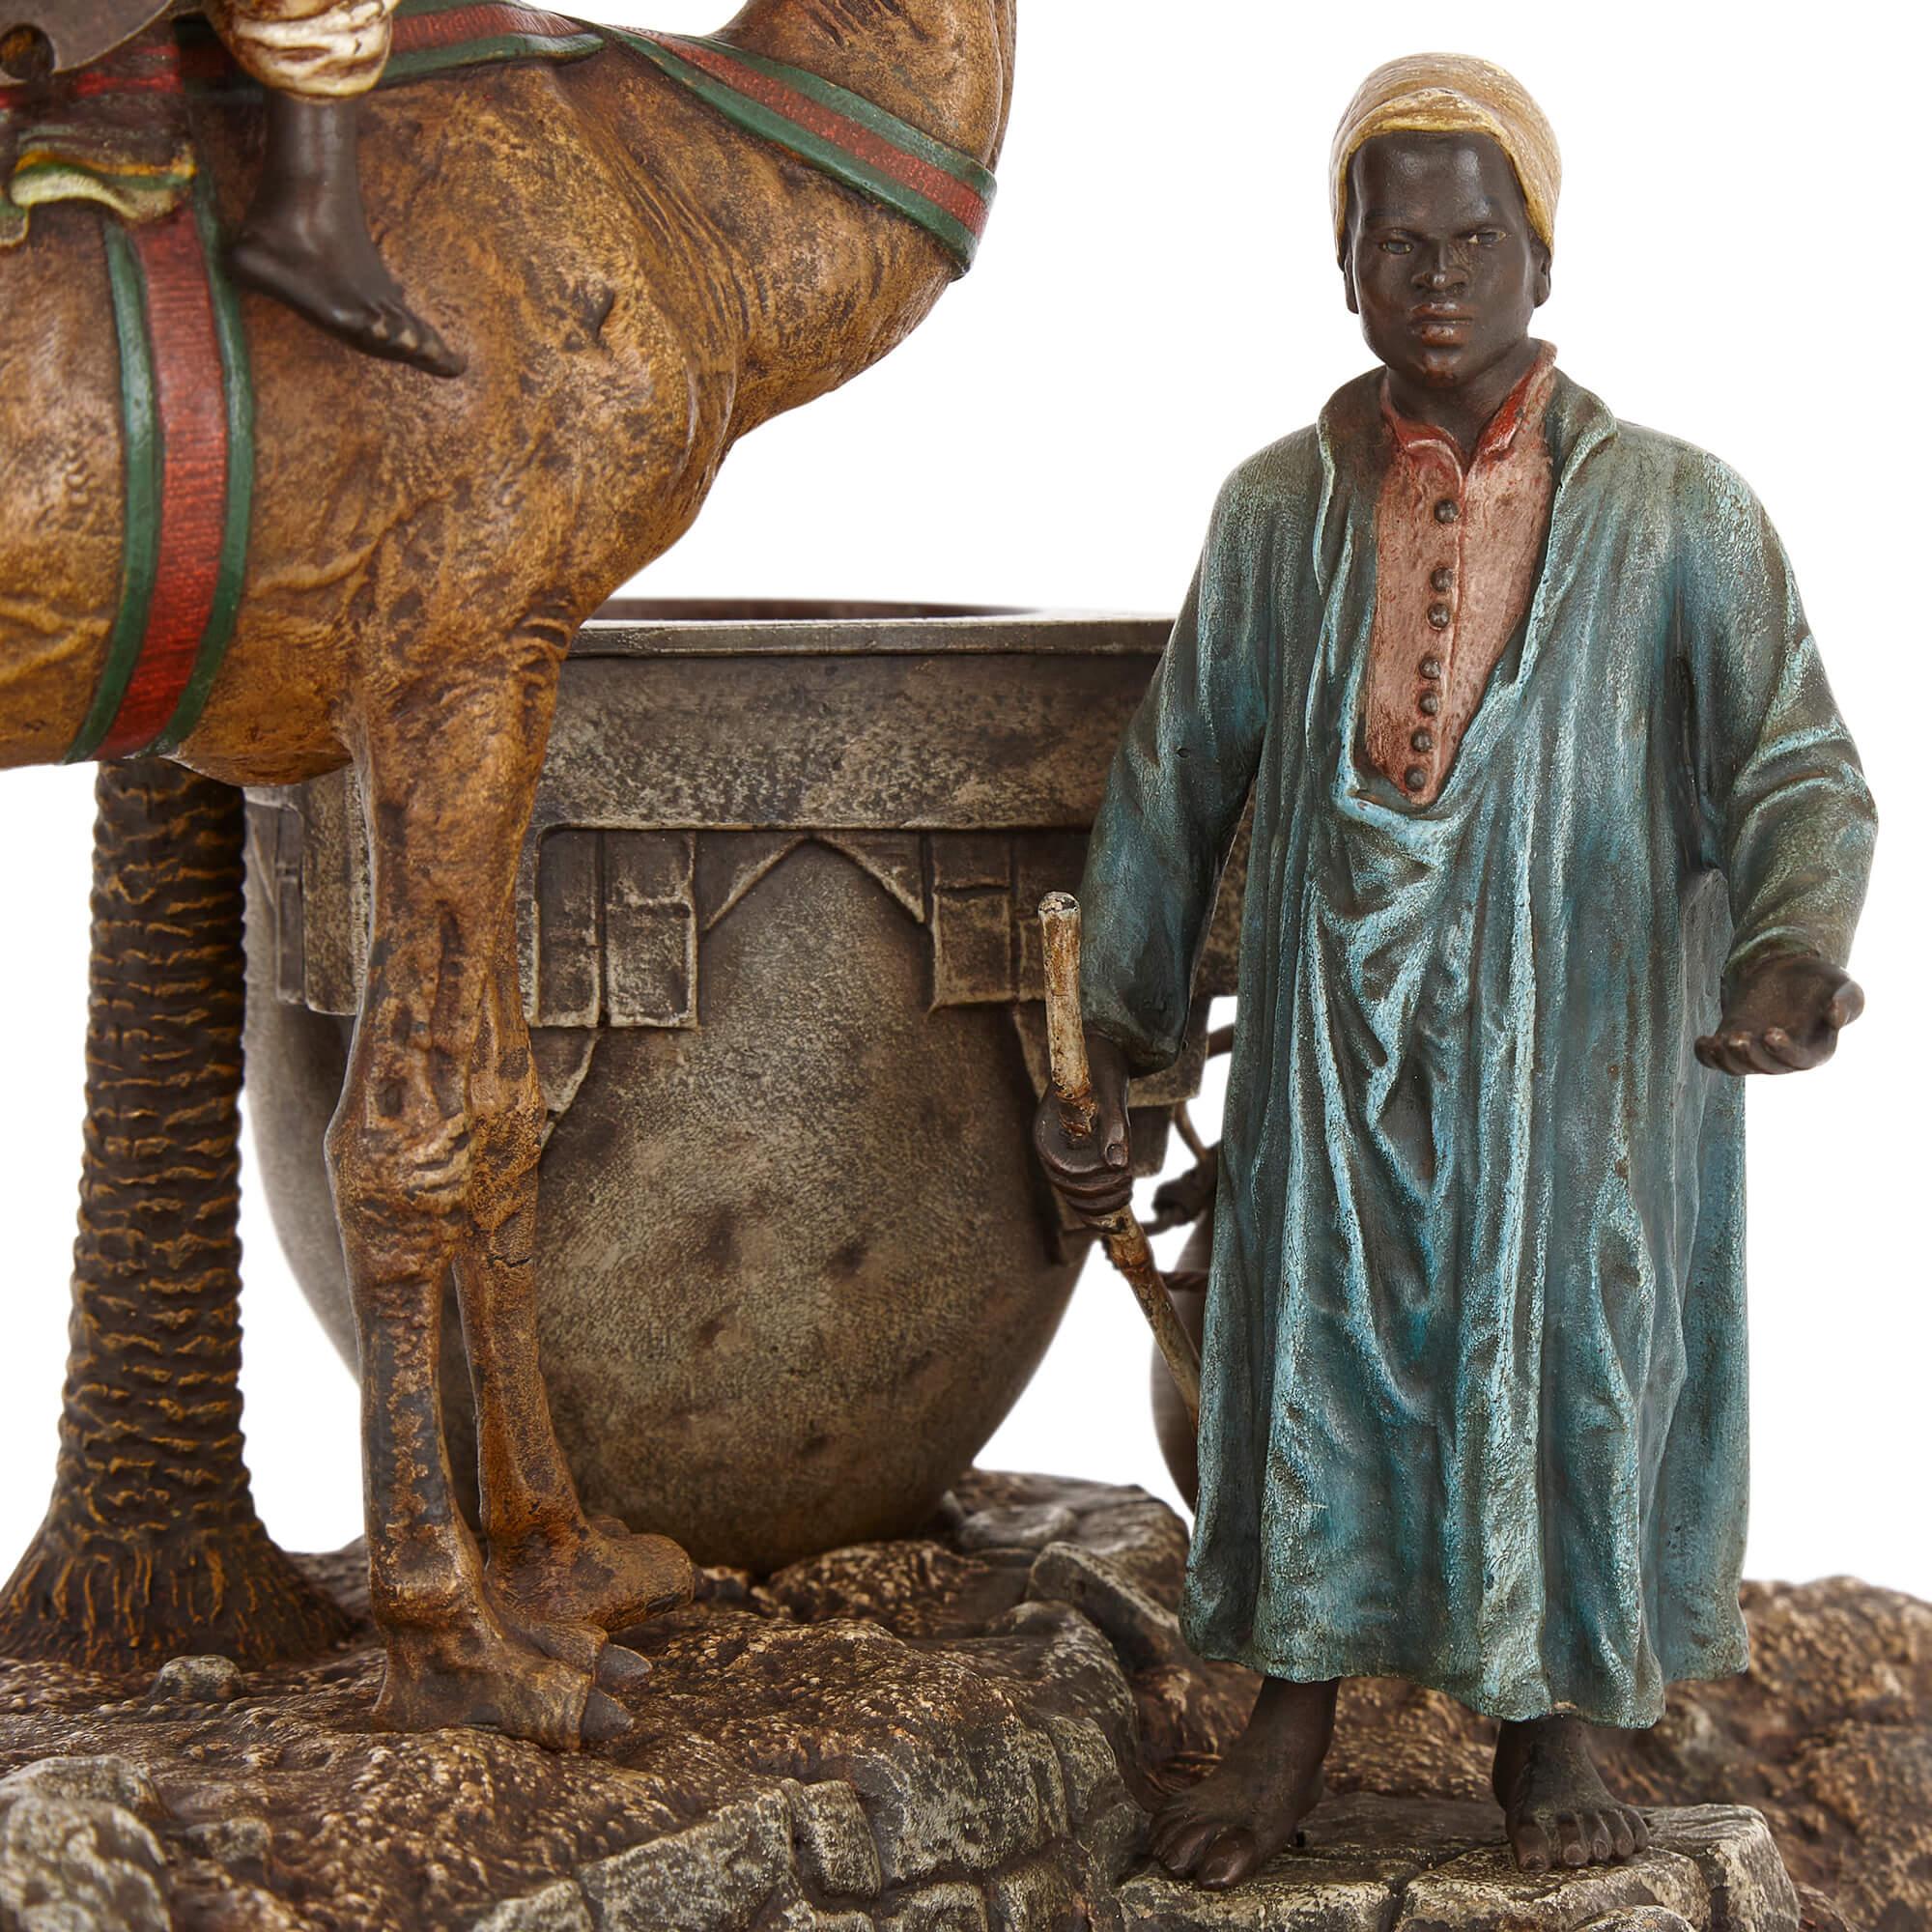 Austrian Antique Viennese Cold-Painted Bronze Sculpture with a Camel by Bergman For Sale